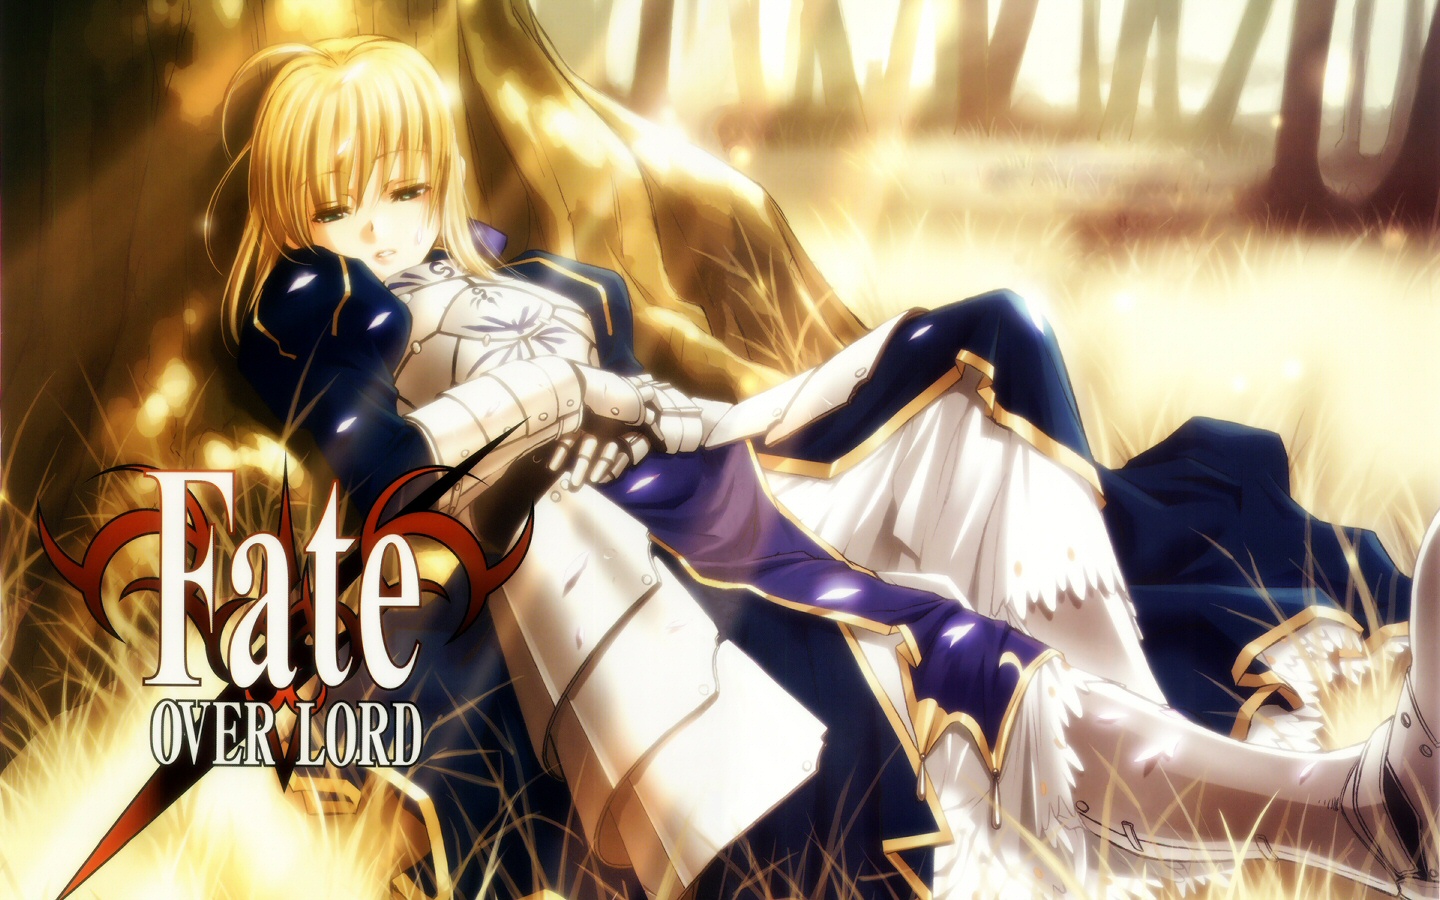  Anime Fate Stay Night Saber Wallpaper 1440x900 Full HD Wallpapers